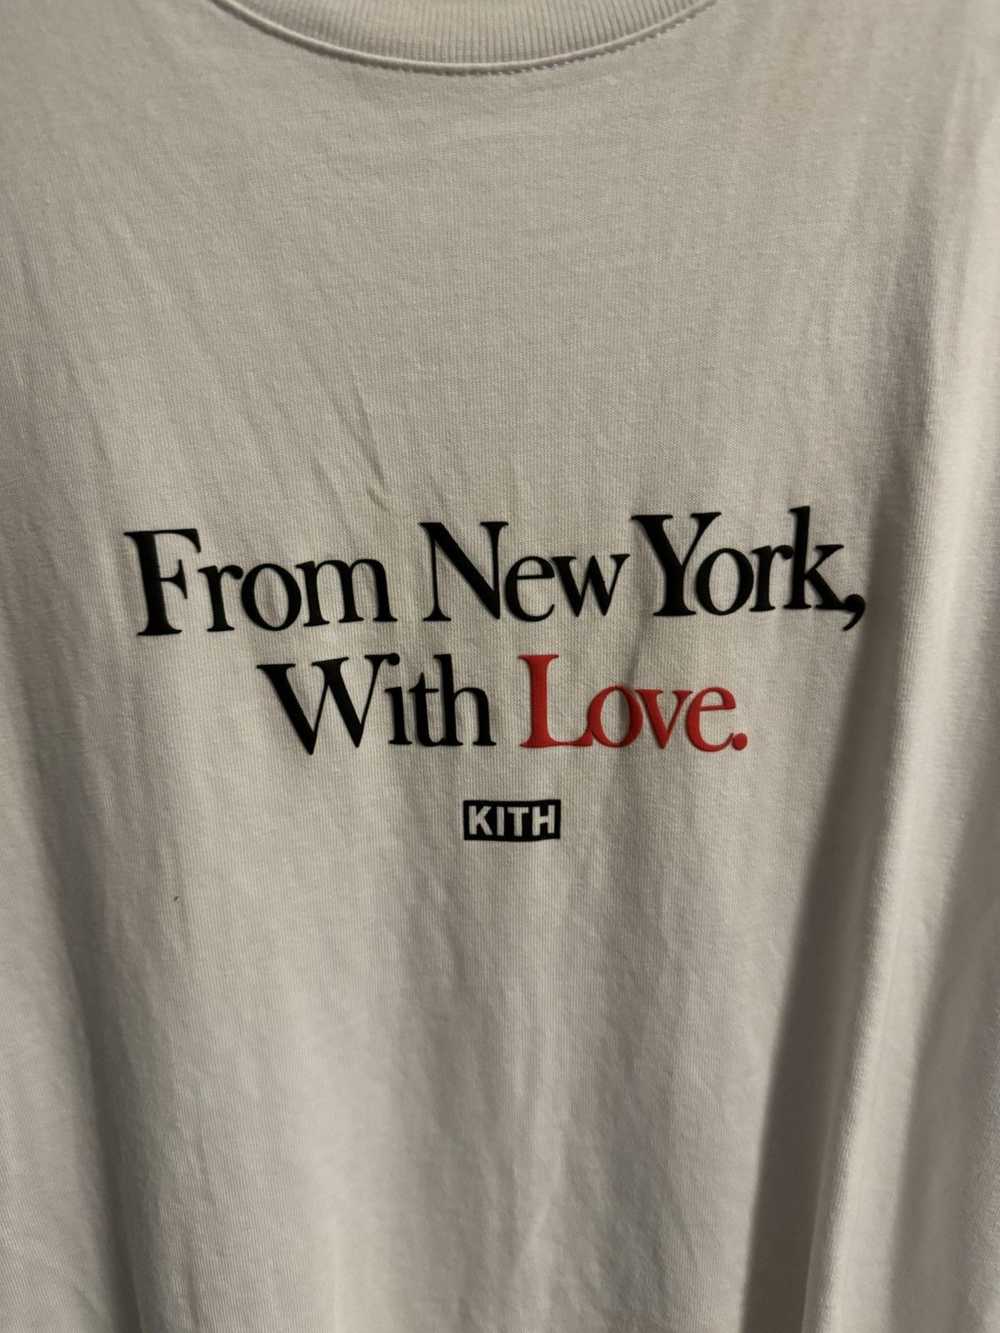 Kith Kith From New York With Love - image 2